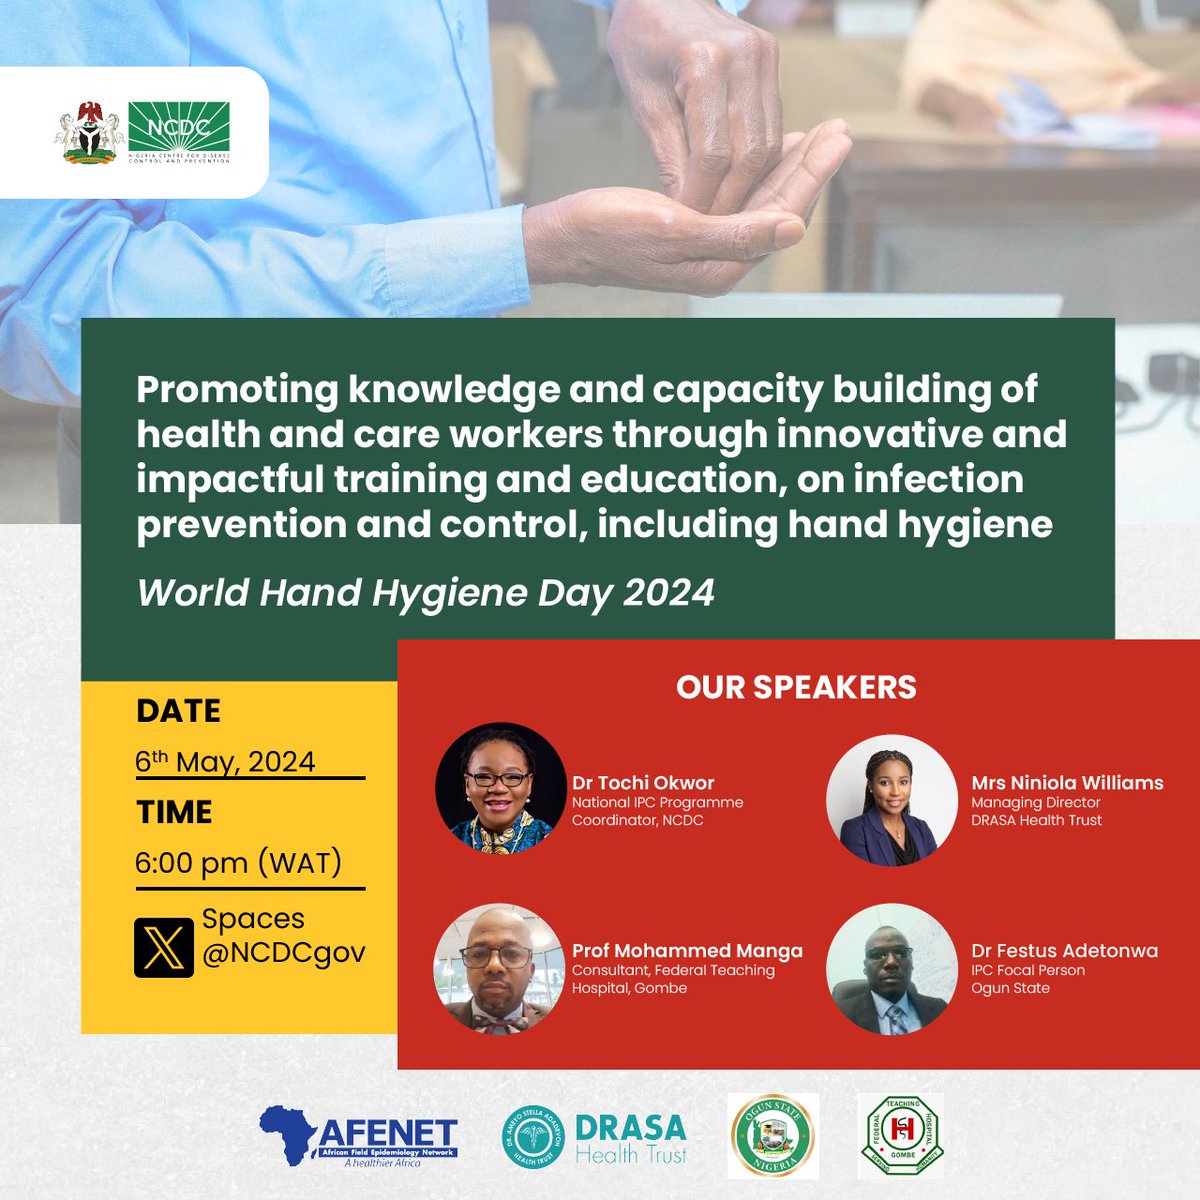 TODAY at 6pm, tune in via XSpaces for an enriching #WorldHandHygieneDay discussion hosted by @NCDCgov on IPC measures to ensure safe care in health facilities. Get valuable insights from experts @drmangamohammed, @Oadetonwa & @tokwor7. Set a reminder: x.com/i/spaces/1eaJb…